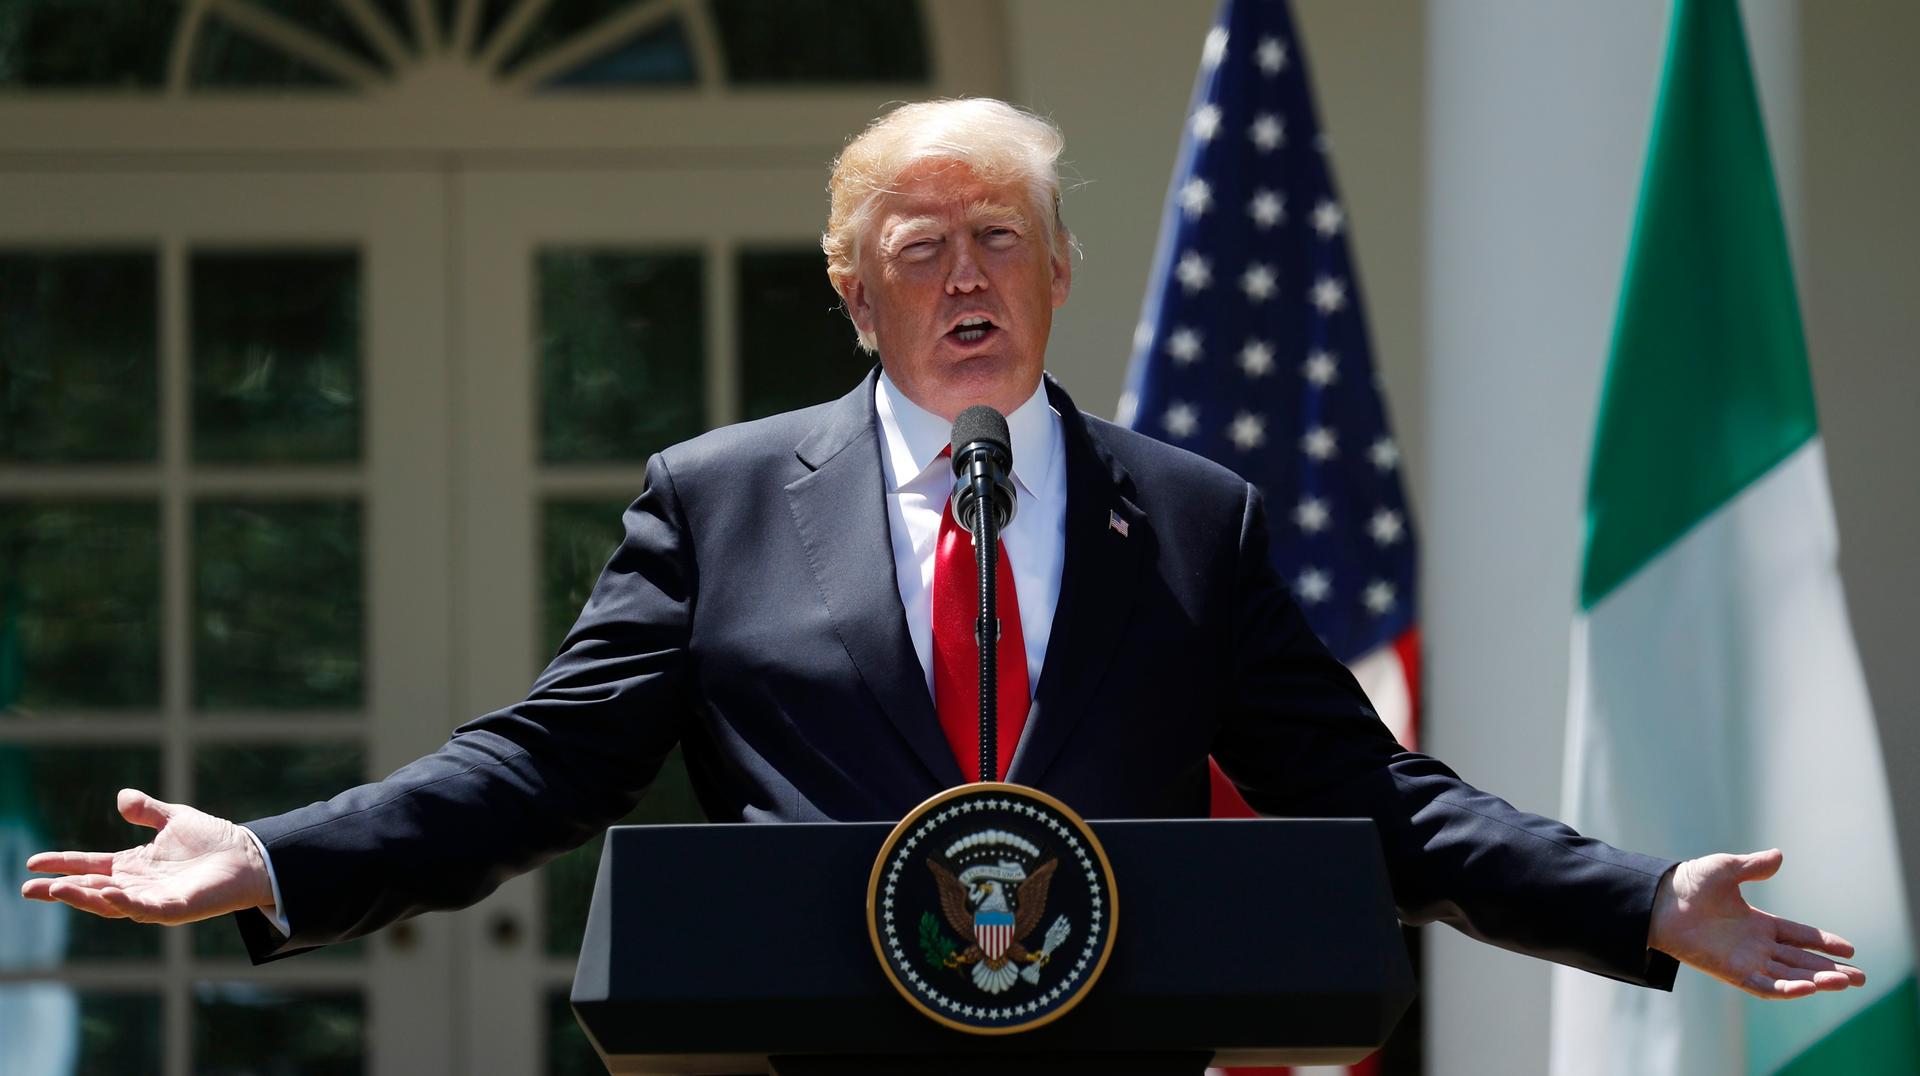 President Donald Trump speaks during a news conference in the Rose Garden of the White House.